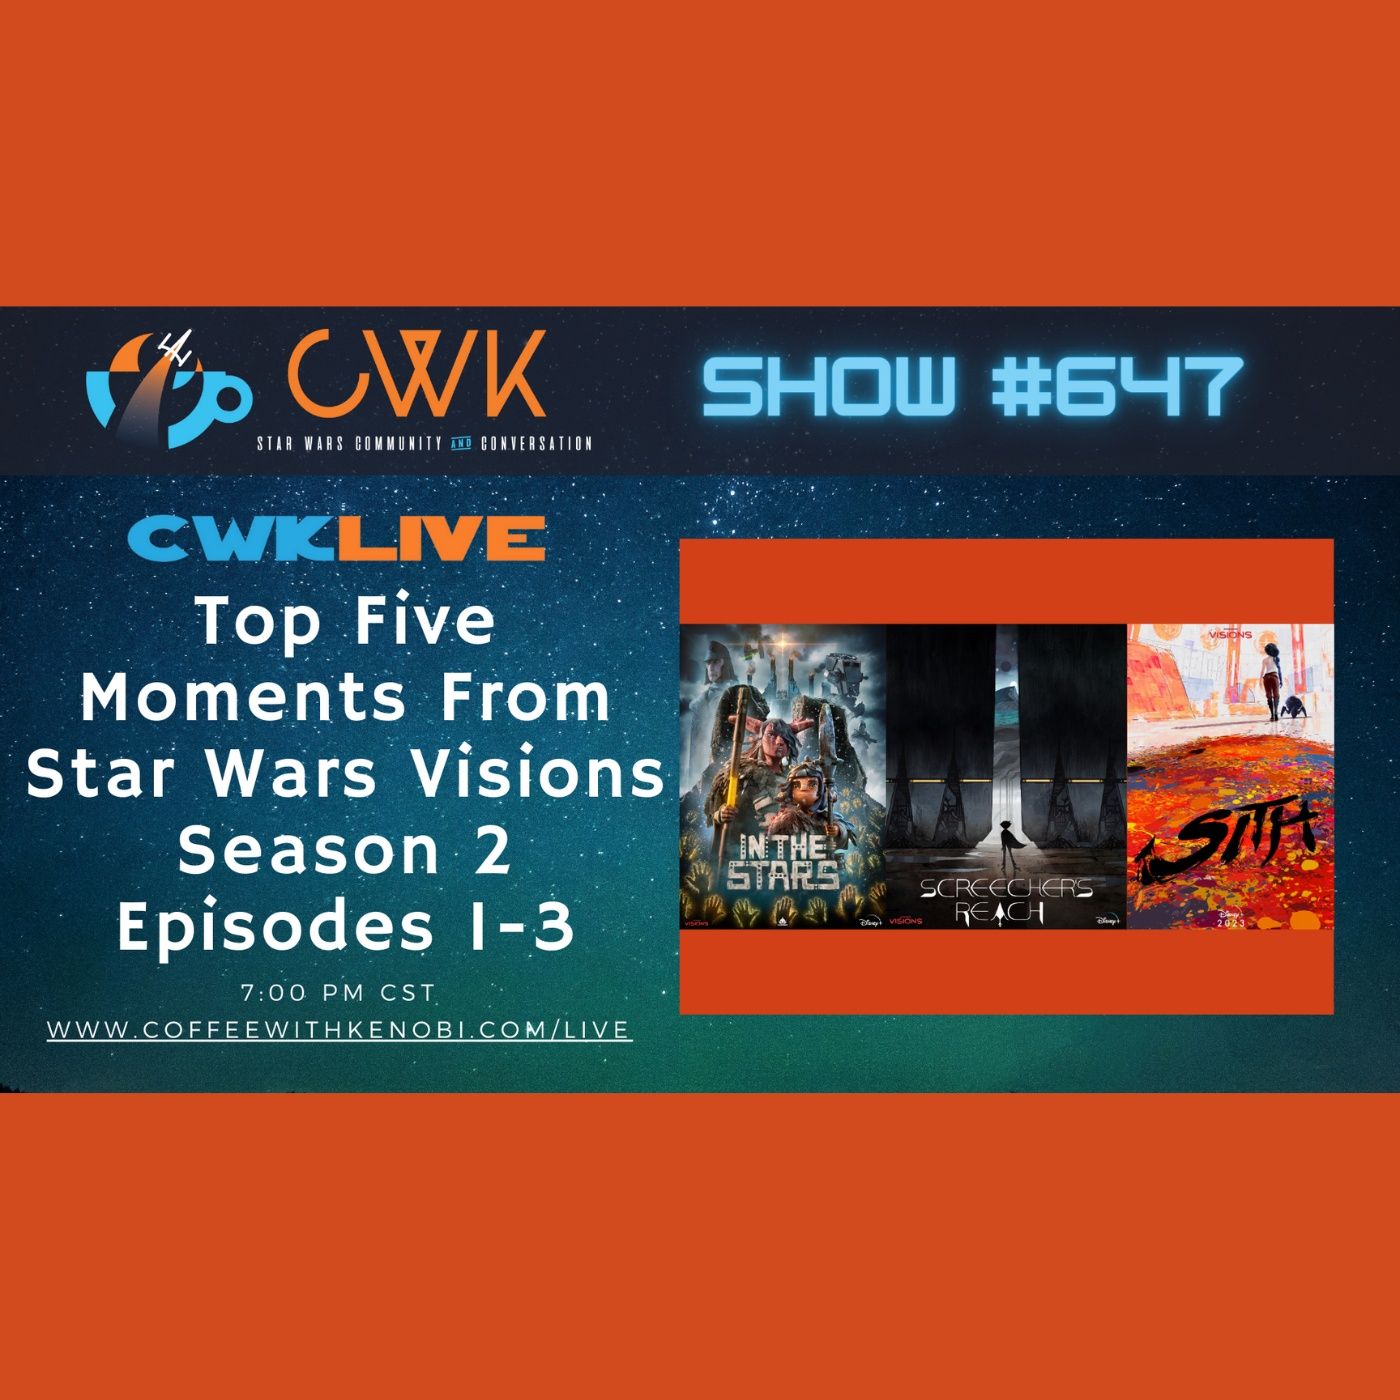 CWK Show #647 LIVE: Top 5 Moments from Star Wars Visions Season Two Episodes 1-3